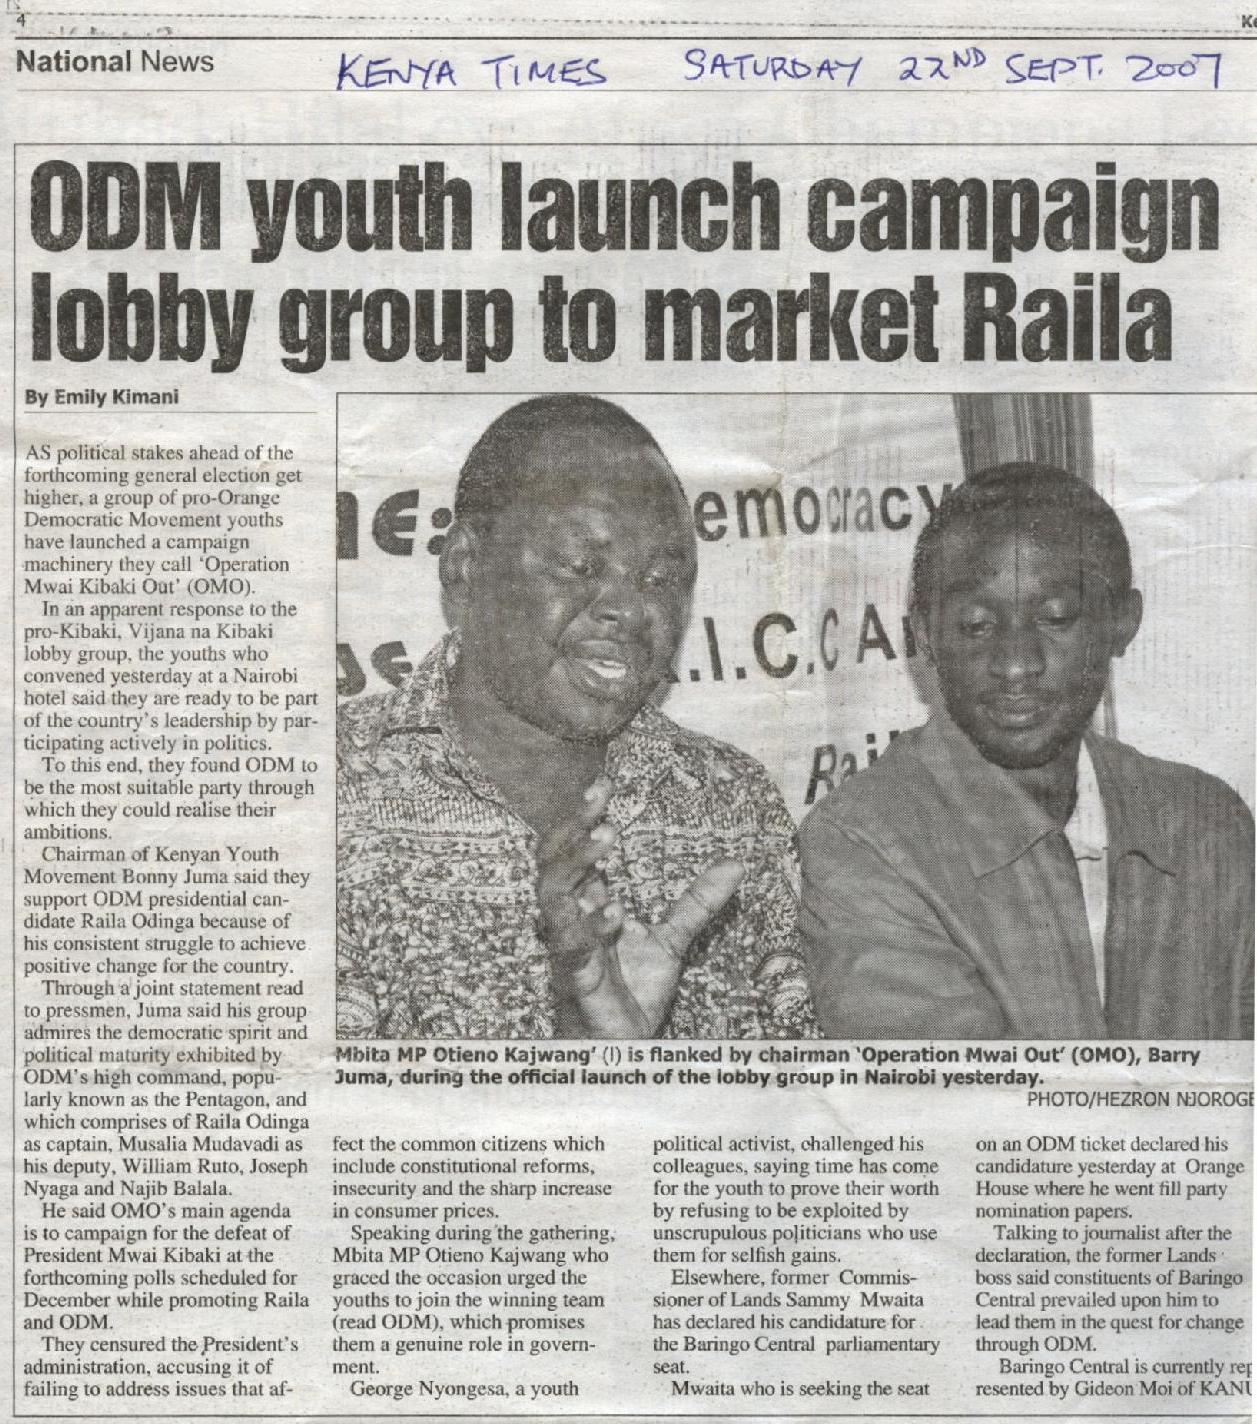 [image] odm youth campaign